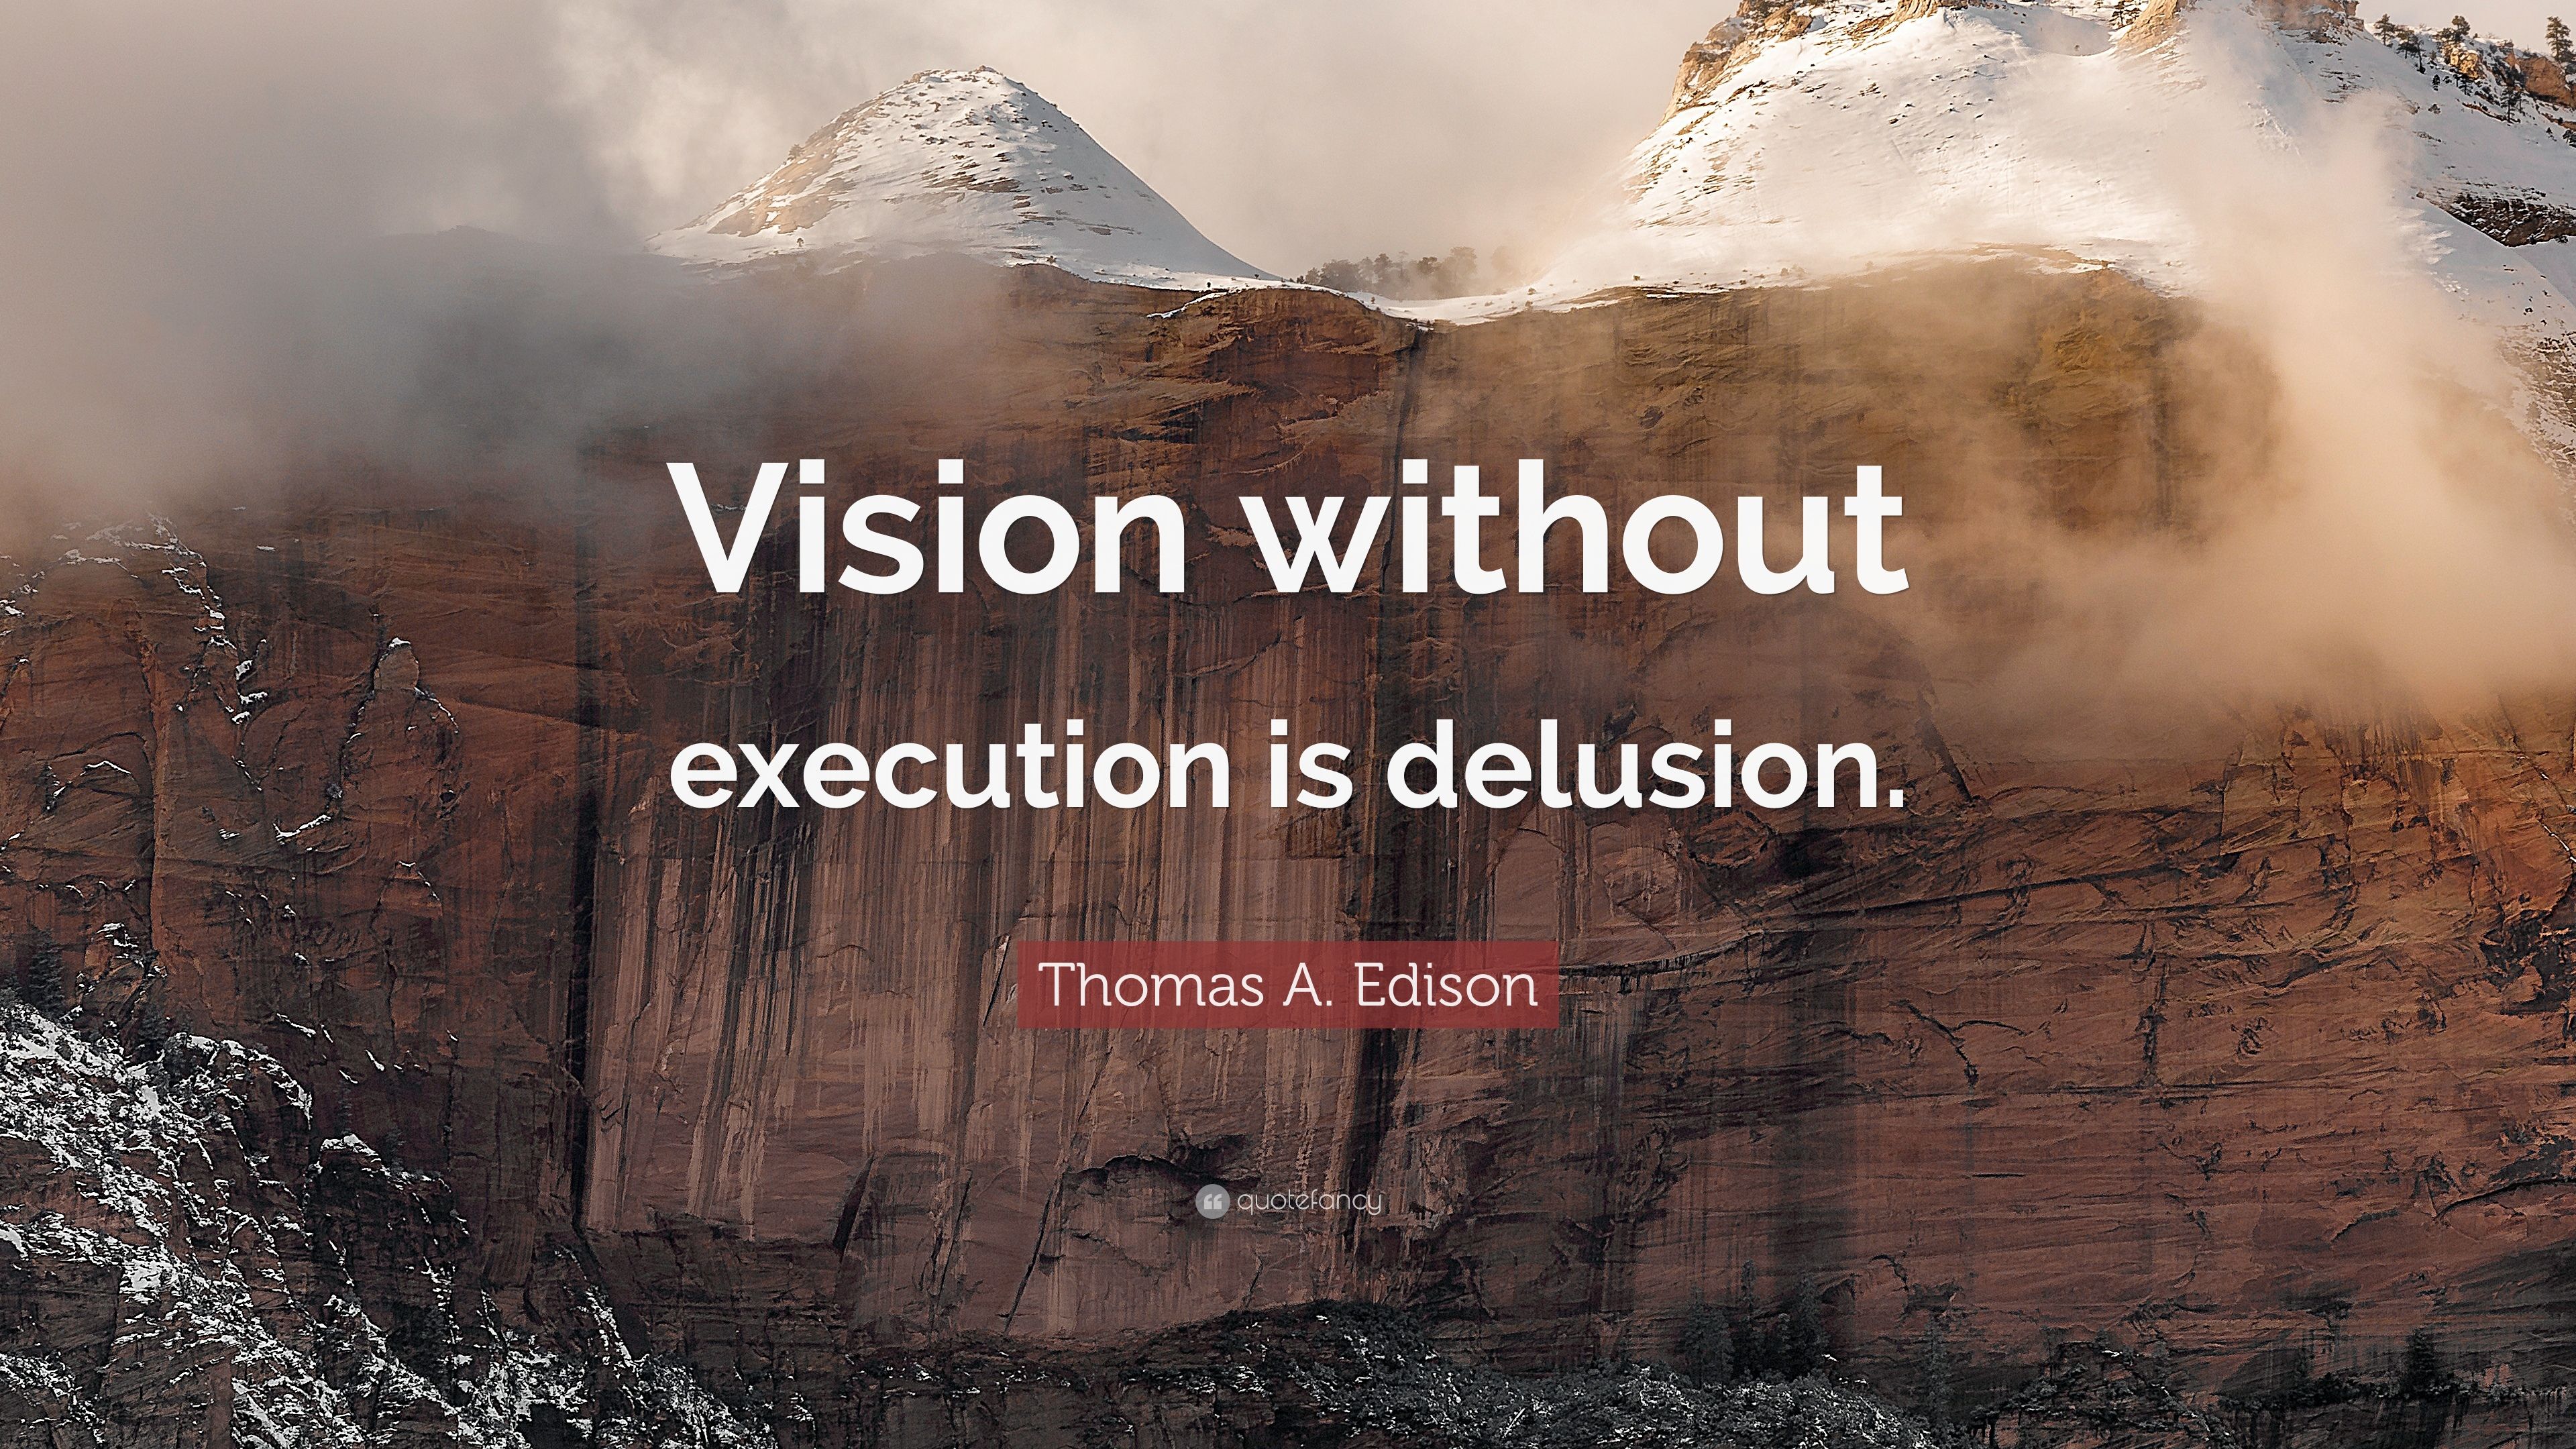 Thomas A. Edison Quote: “Vision without execution is delusion